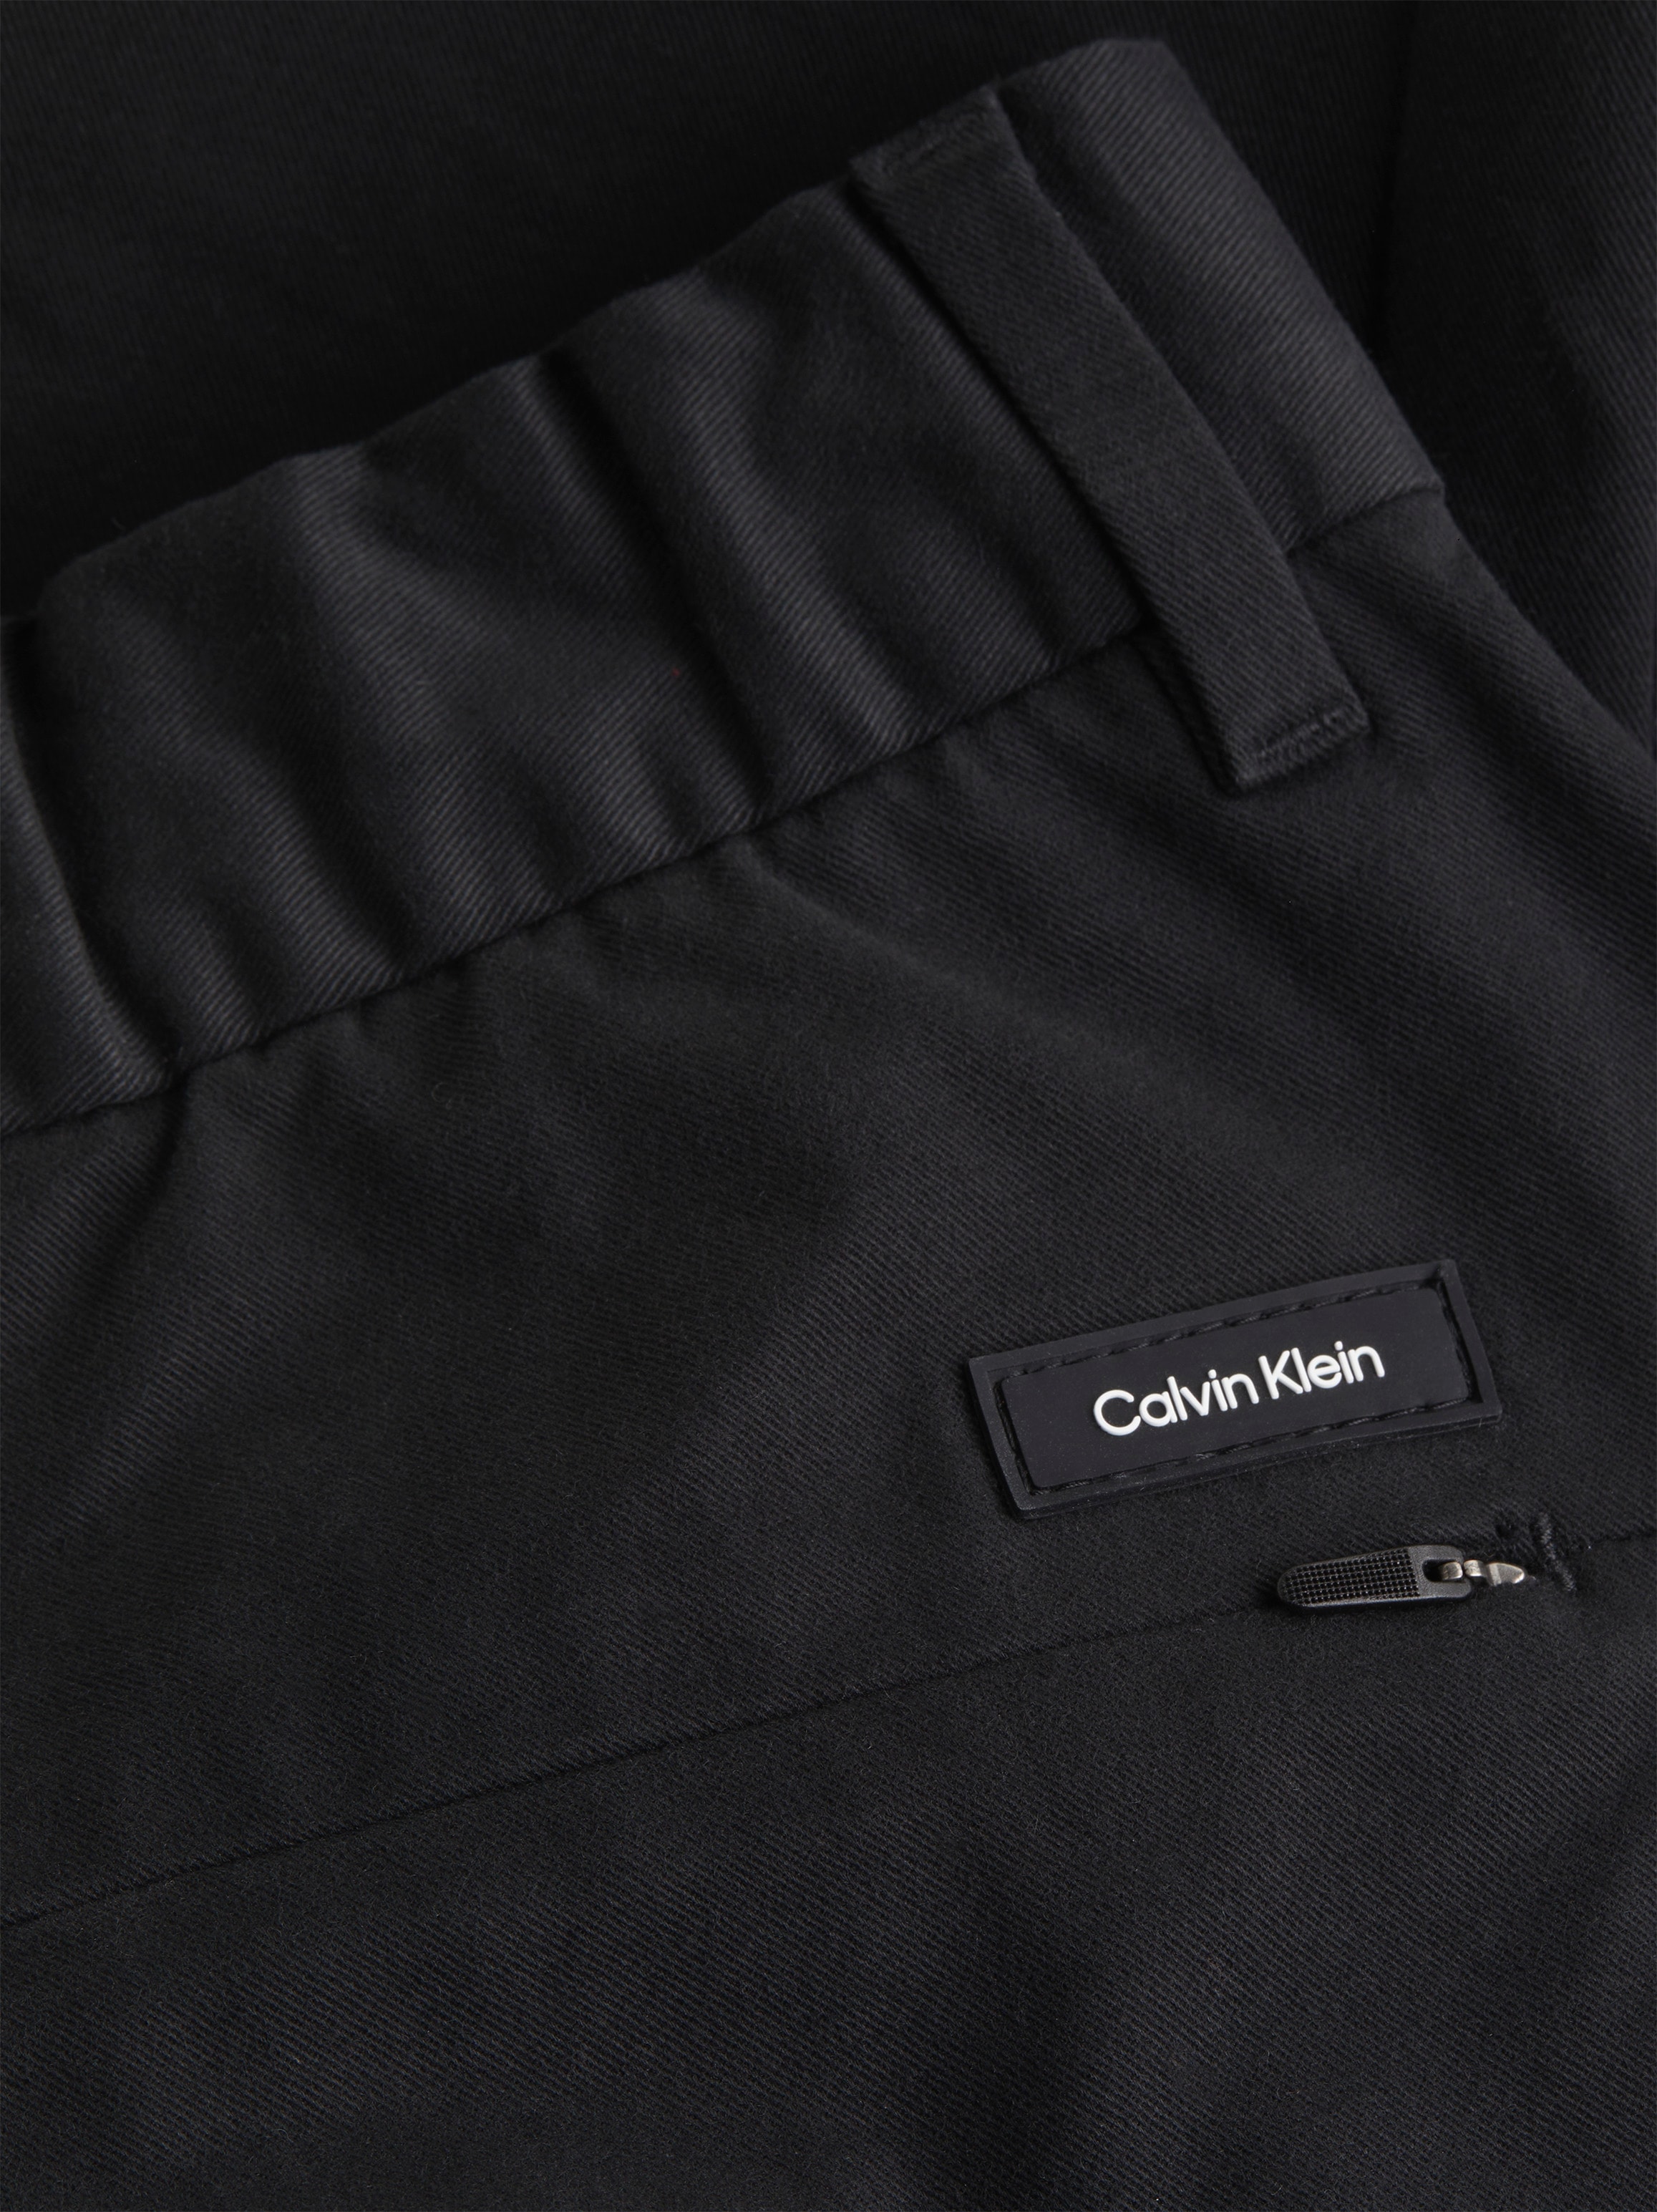 Calvin Klein Stretch-Hose »MODERN TWILL TAPERED PANT«